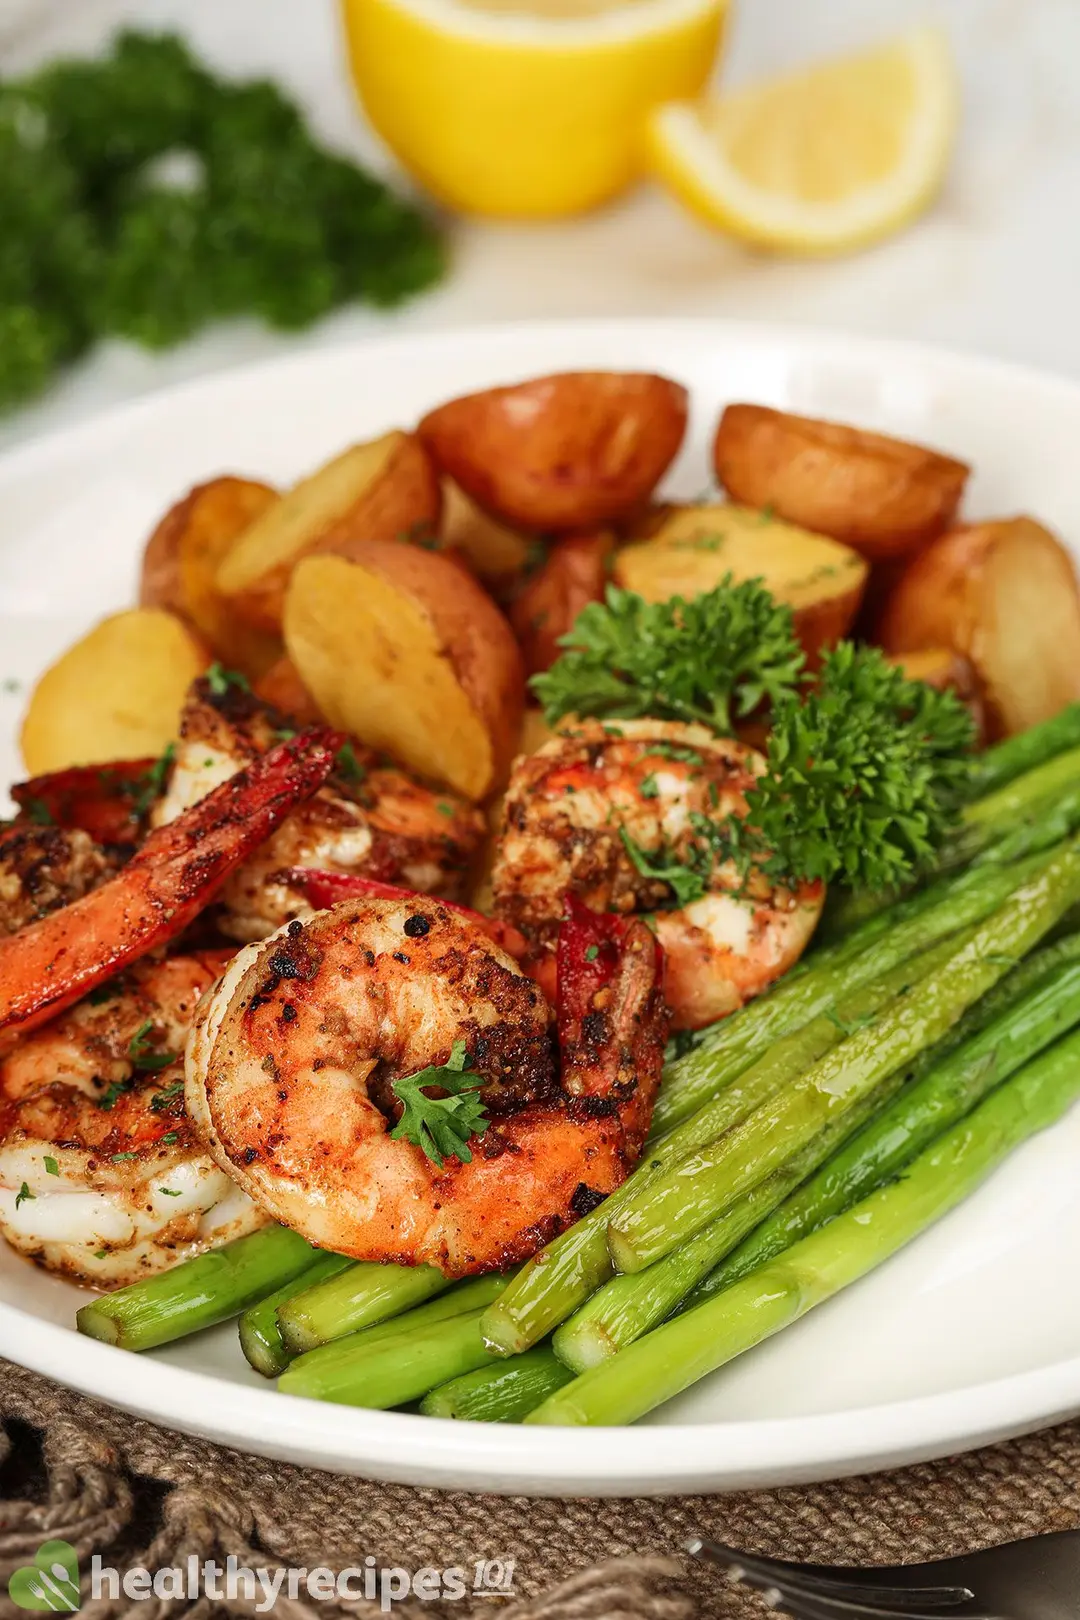 What Makes Our Pan Seared Shrimp Healthy